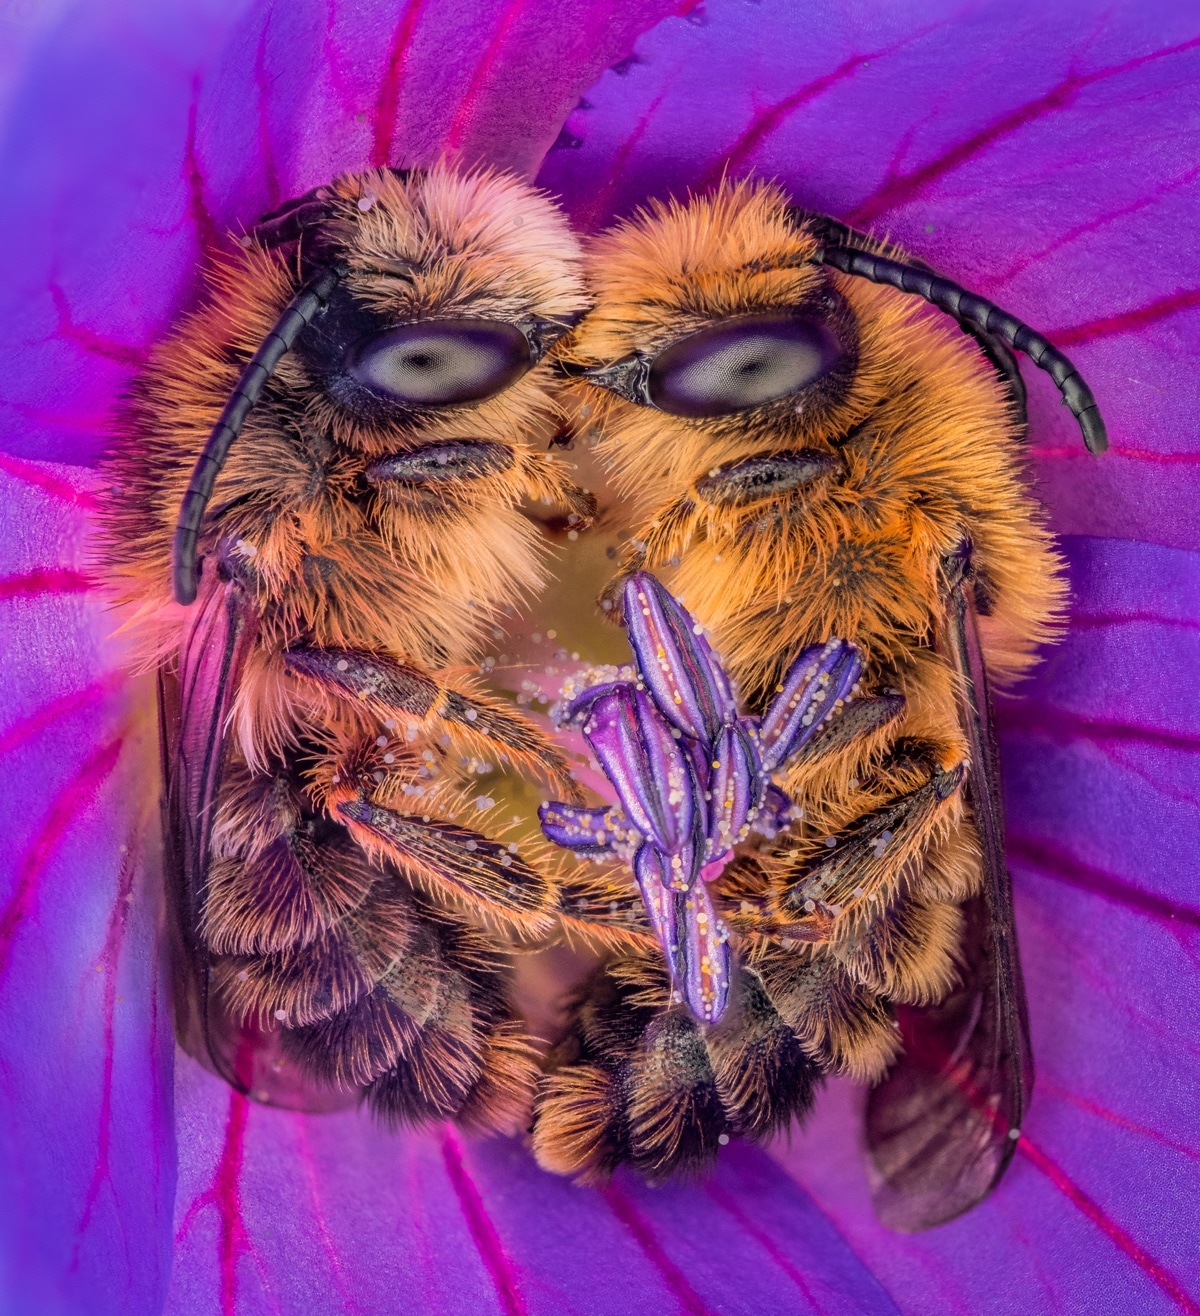 Bees Sleeping Together in a Flower